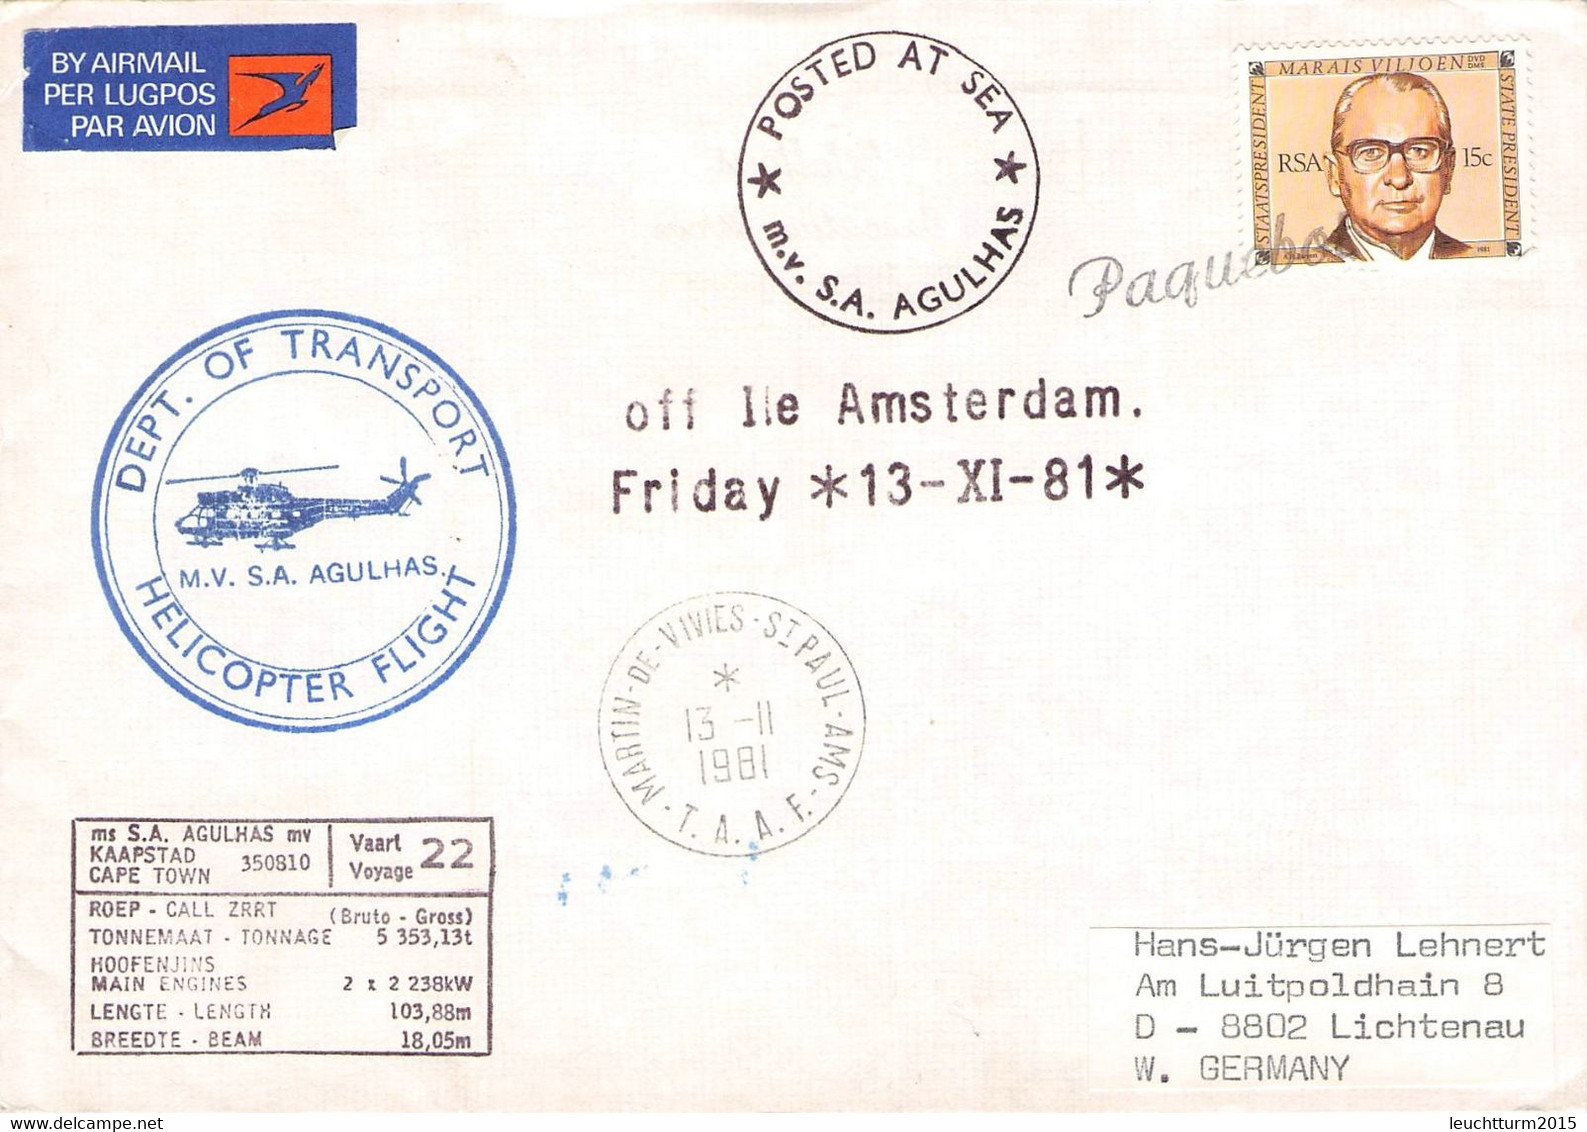 SOUTH AFRICA - POSTED AT SEA MV S.A. AGULHAS 1981 > GERMANY / ZM275 - Lettres & Documents